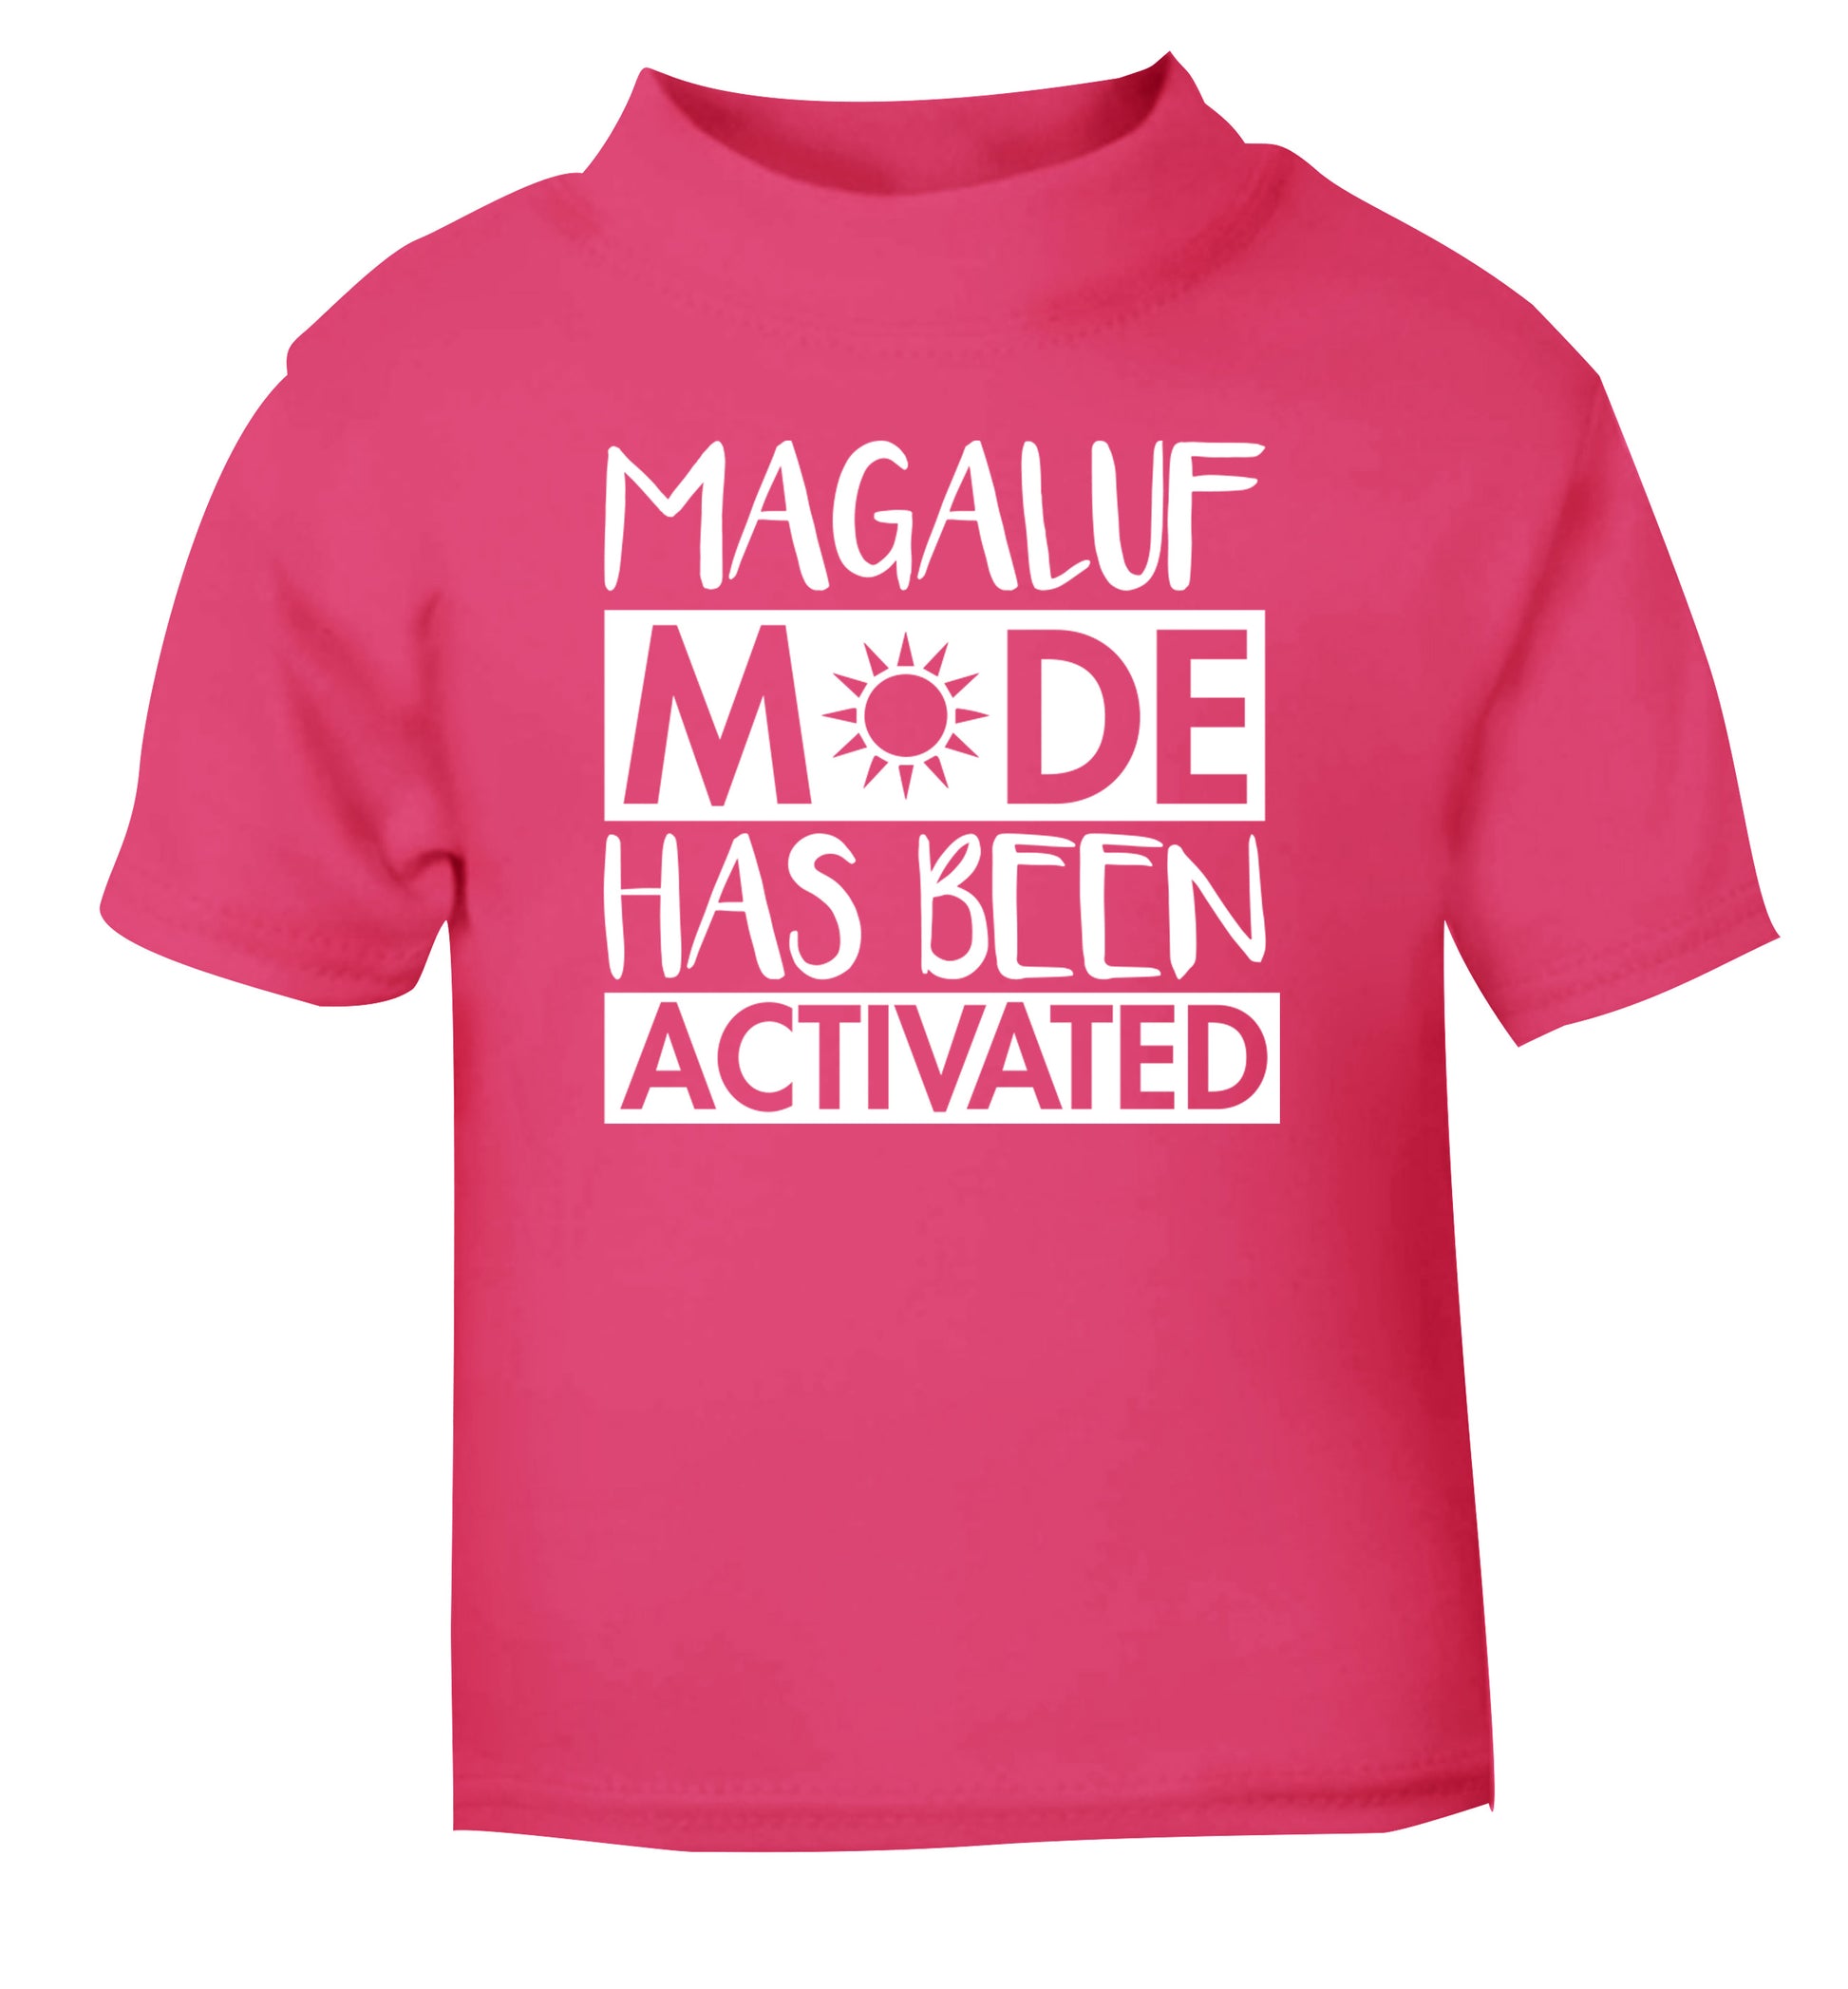 Magaluf mode has been activated pink Baby Toddler Tshirt 2 Years